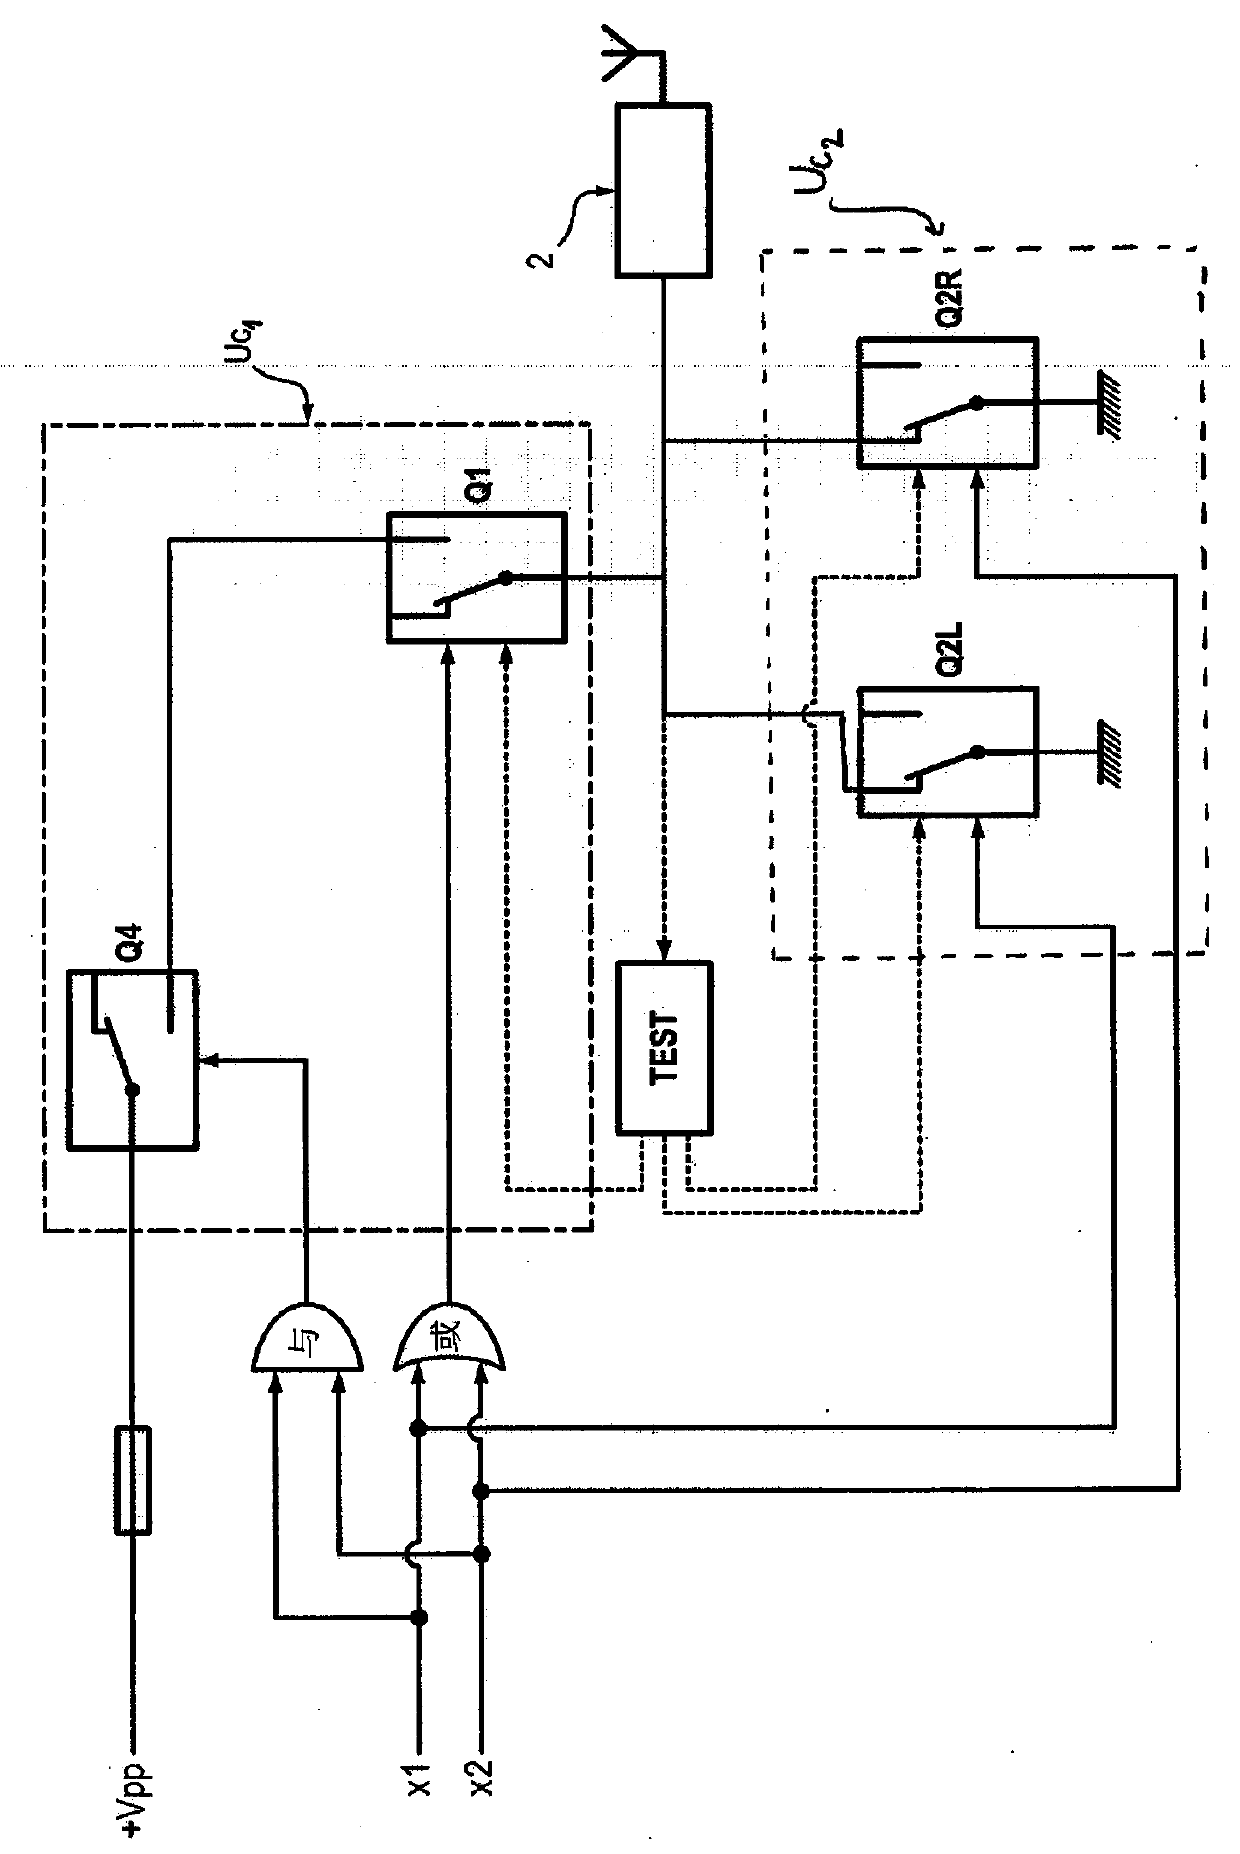 A circuit with transistors and fuses to cut off the power supply